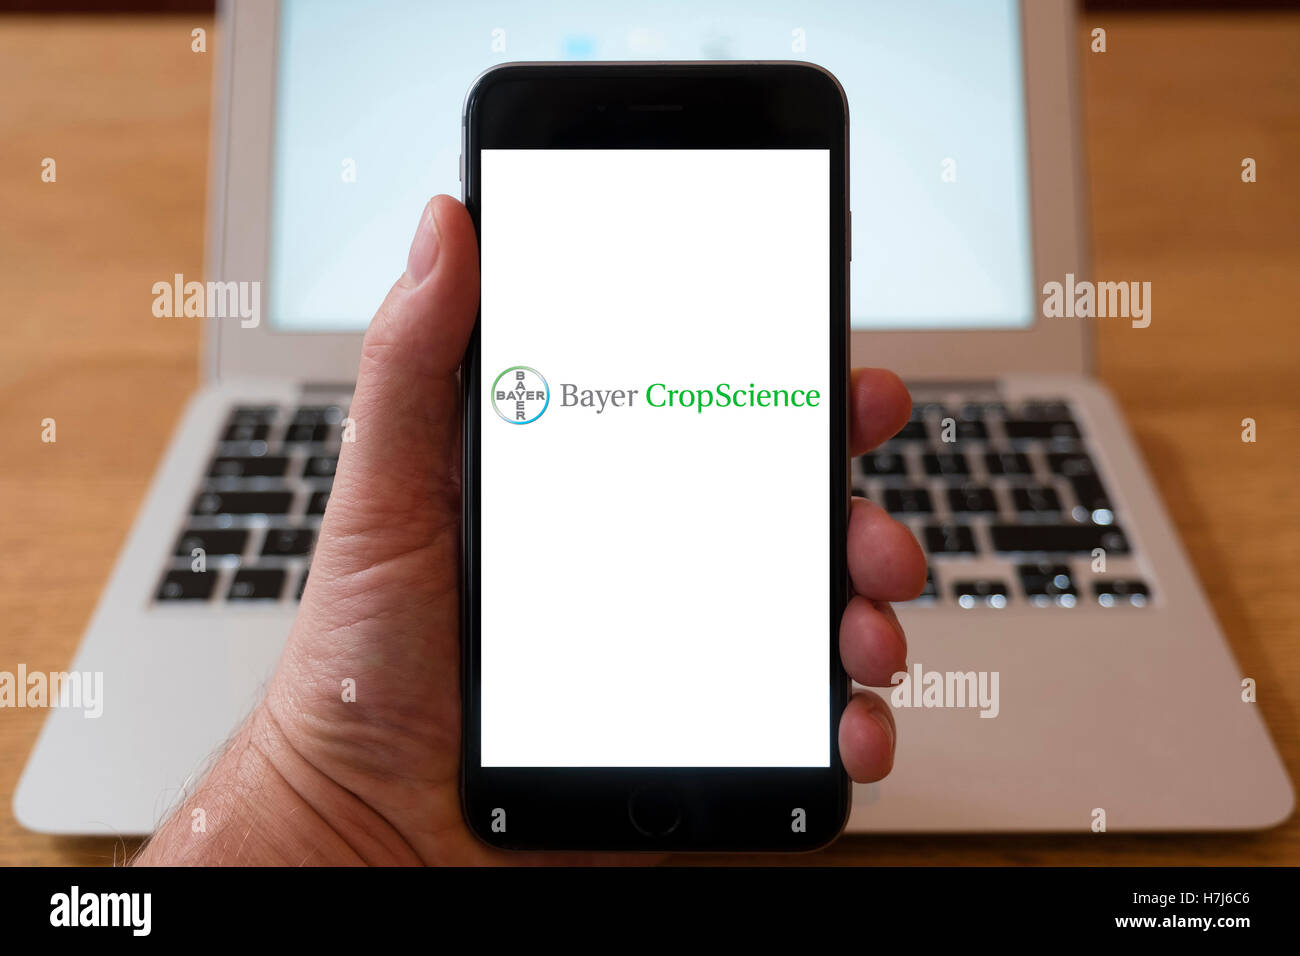 Using iPhone smart phone to display logo of Bayer CropScience a biotech company Stock Photo